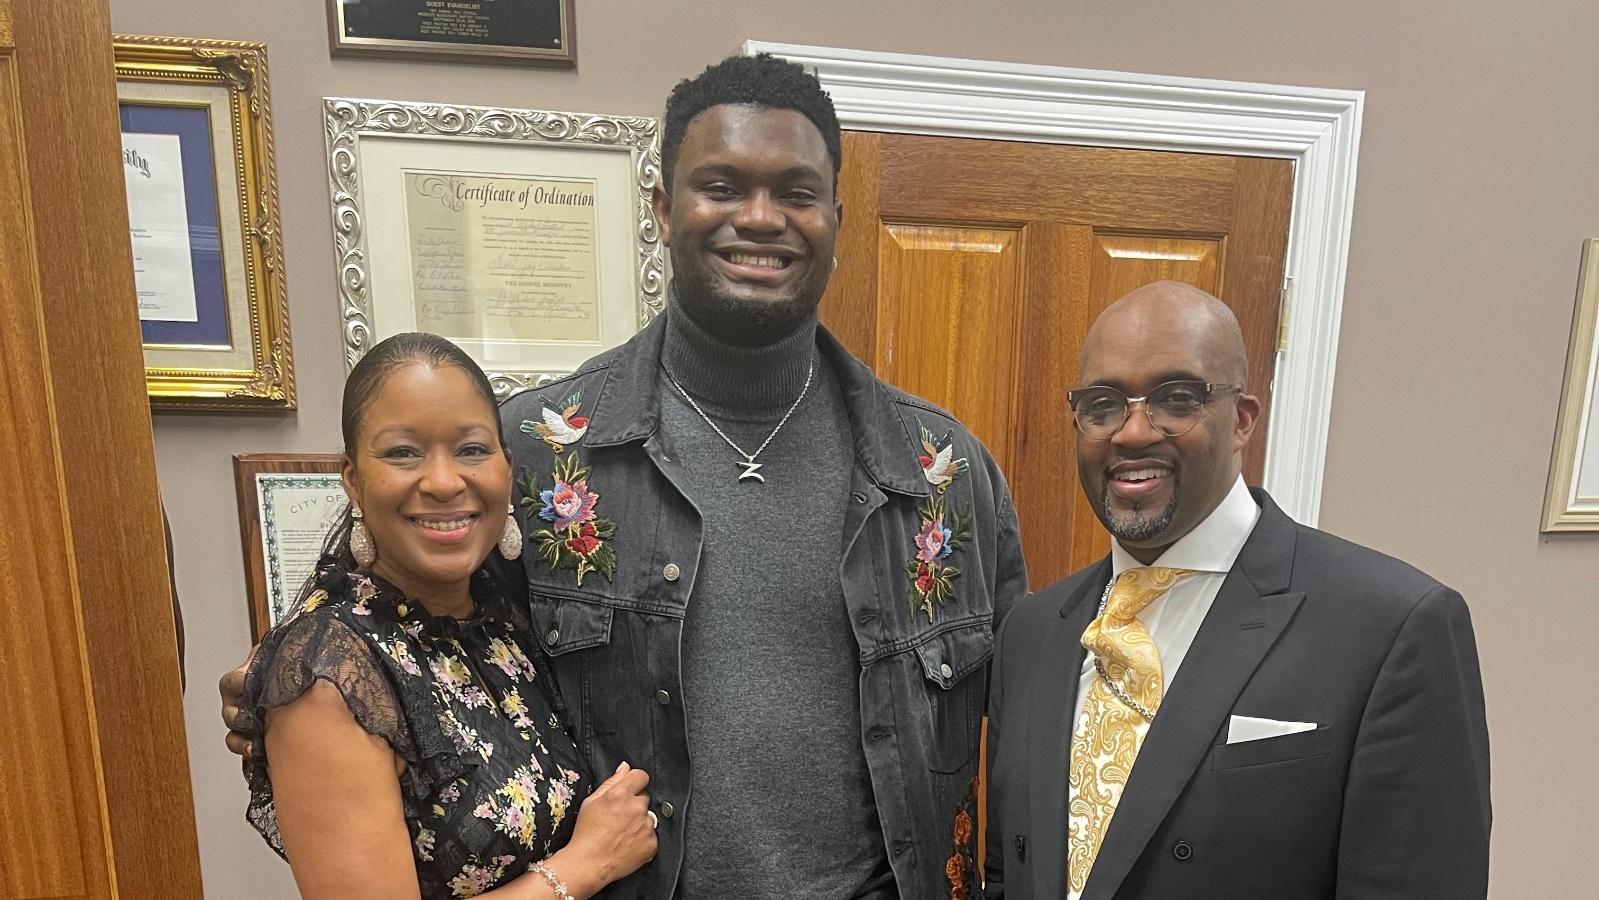 Zion Williamson's injury won't sideline him from community: How a church  visit shows Pelicans star's connection to New Orleans | Sporting News